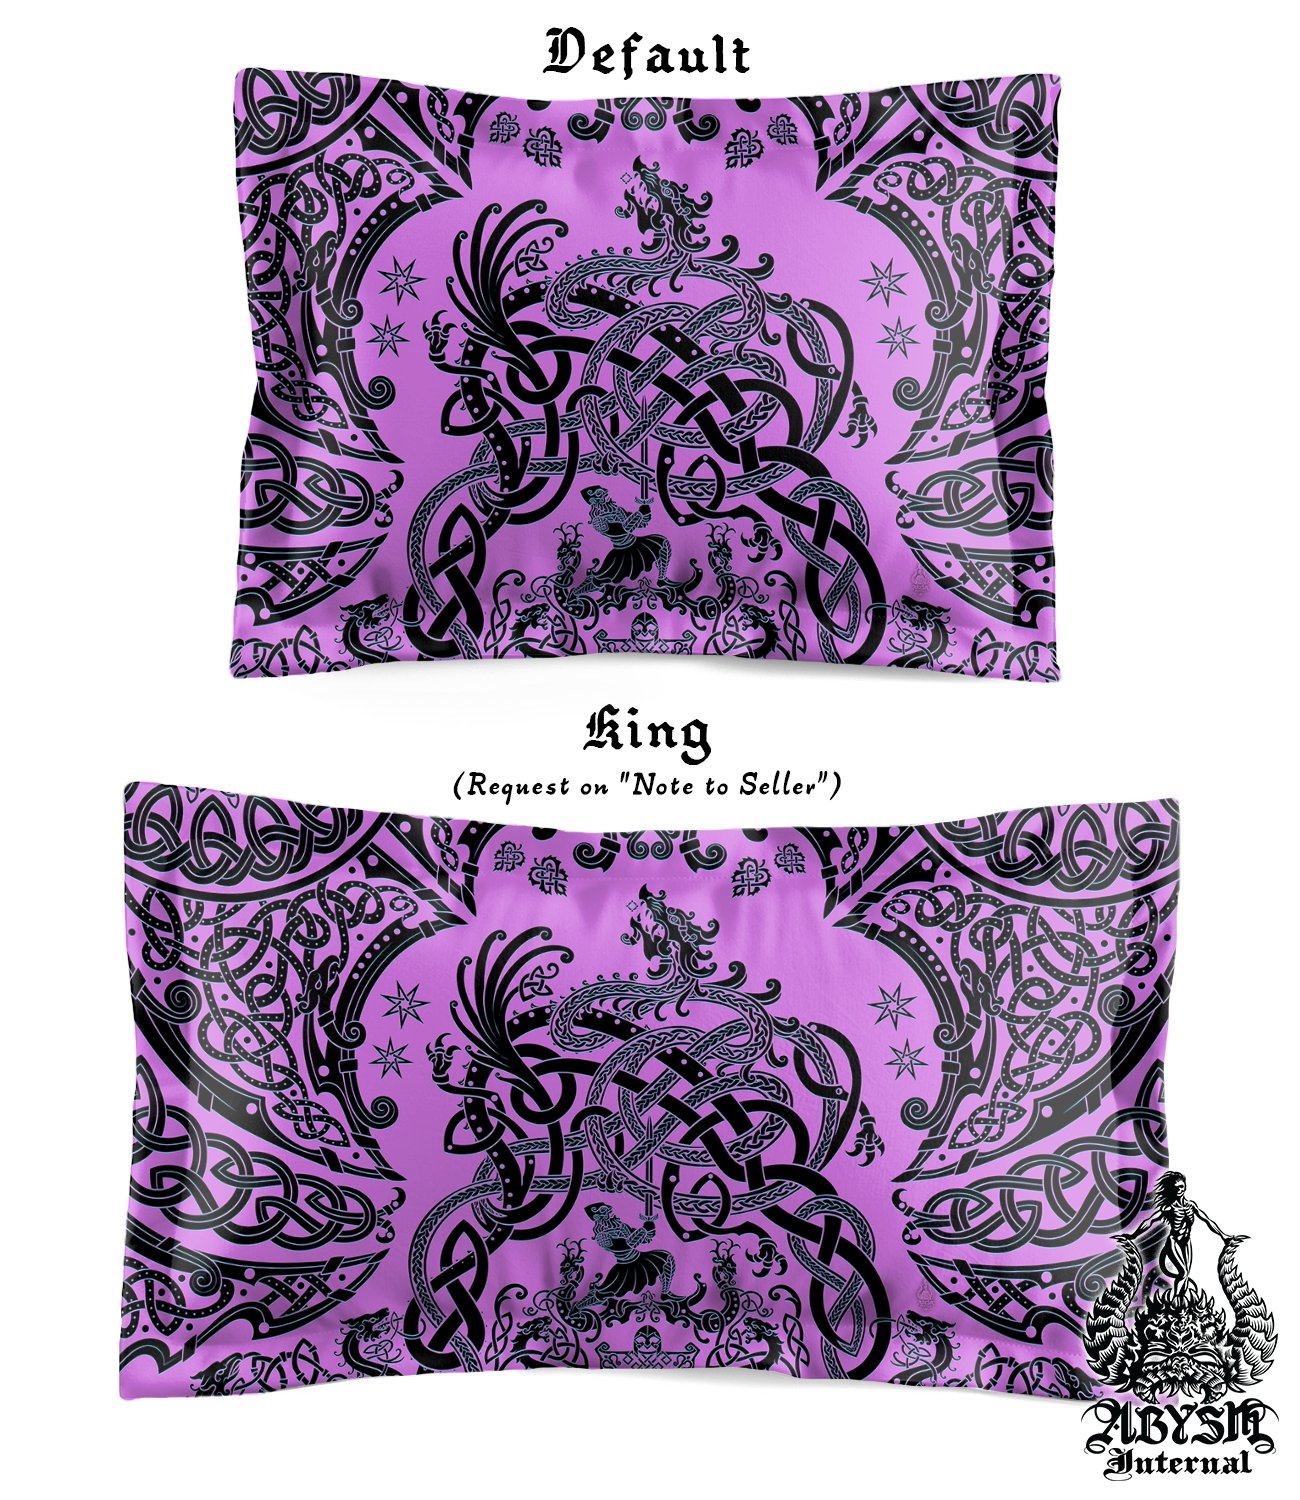 Viking Bedding Set, Comforter and Duvet, Norse Bed Cover and Bedroom Decor, Nordic Art, Sigurd kills Dragon Fafnir, King, Queen and Twin Size - Pastel Goth - Abysm Internal